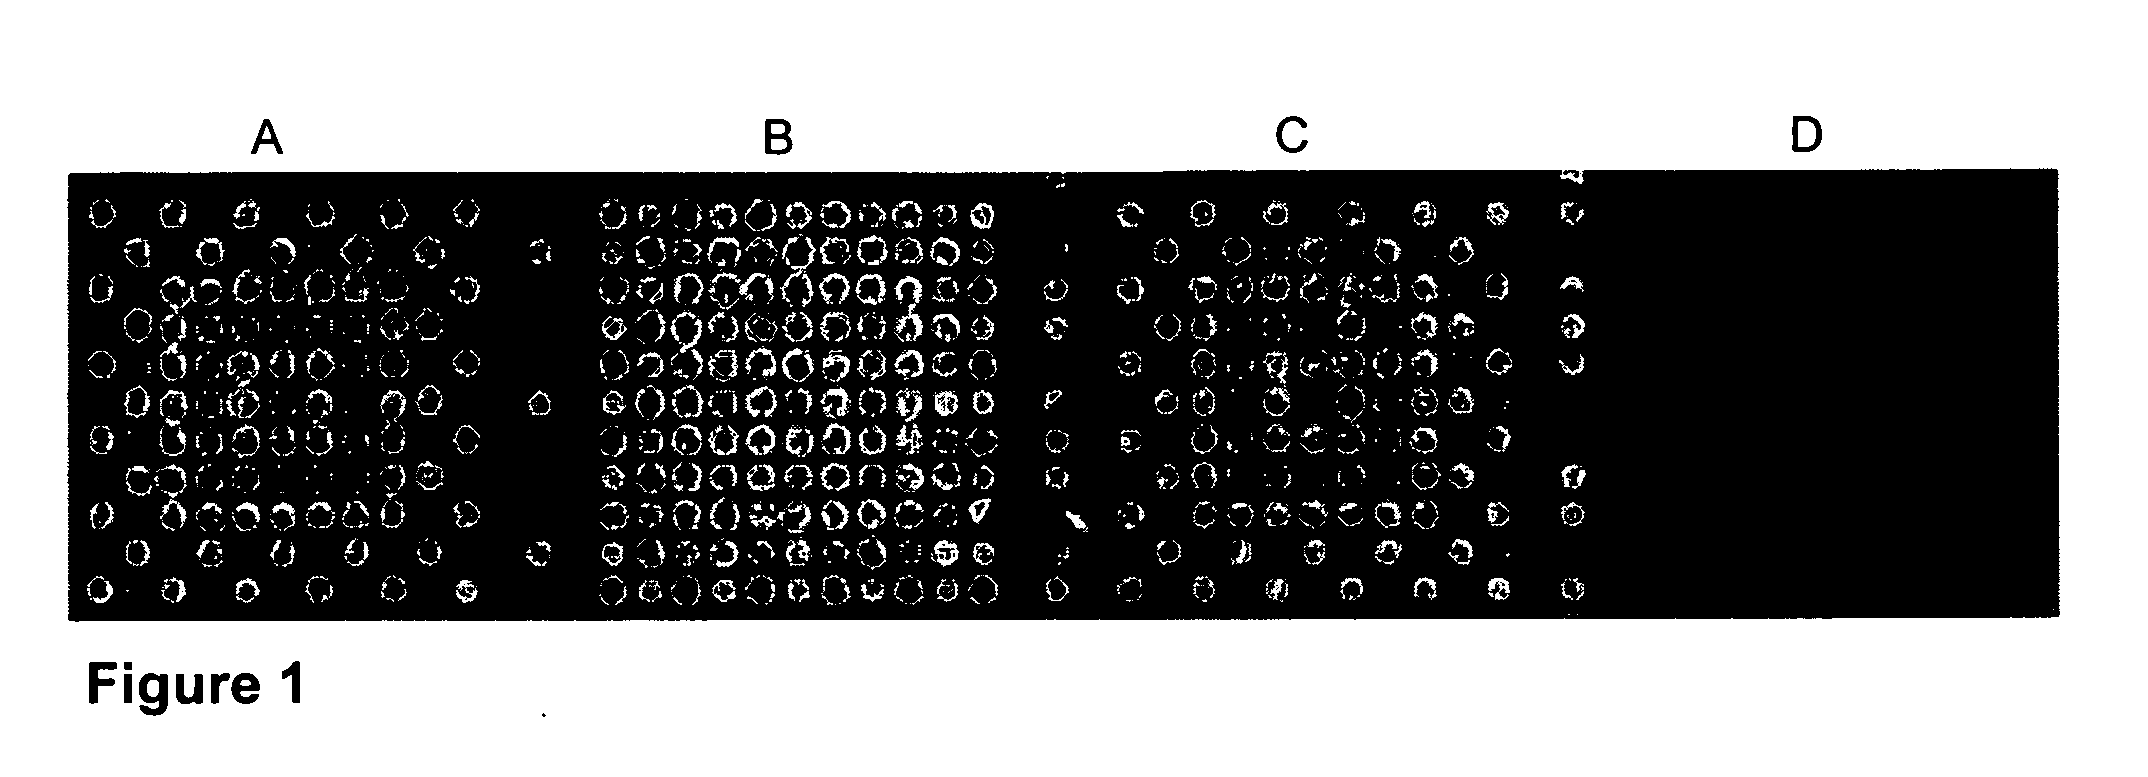 Microarray having a base cleavable succinate linker